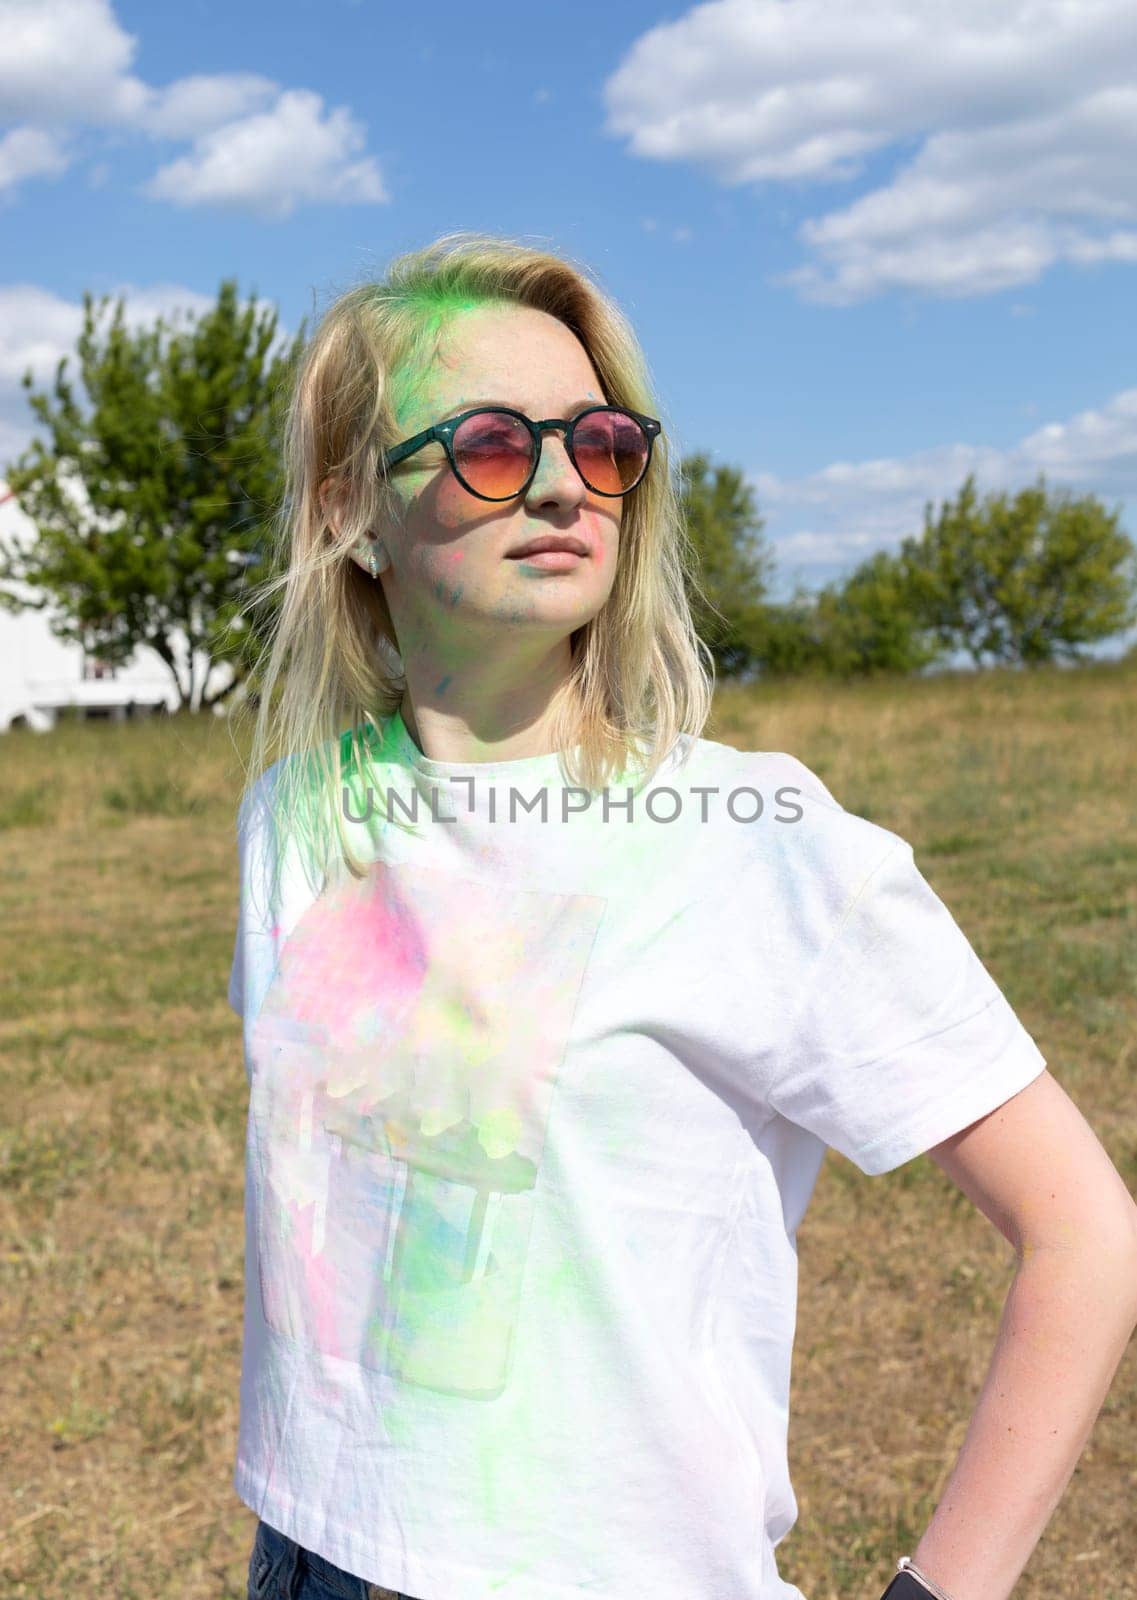 Portrait Pretty Blond Woman With Colored Dye, Powder On Face And Cloth On Holi Colors Festival In Meadow, Sunny Day. Playful Cultural Event With Throwing Bright Neon Powder. Vertical Plane.